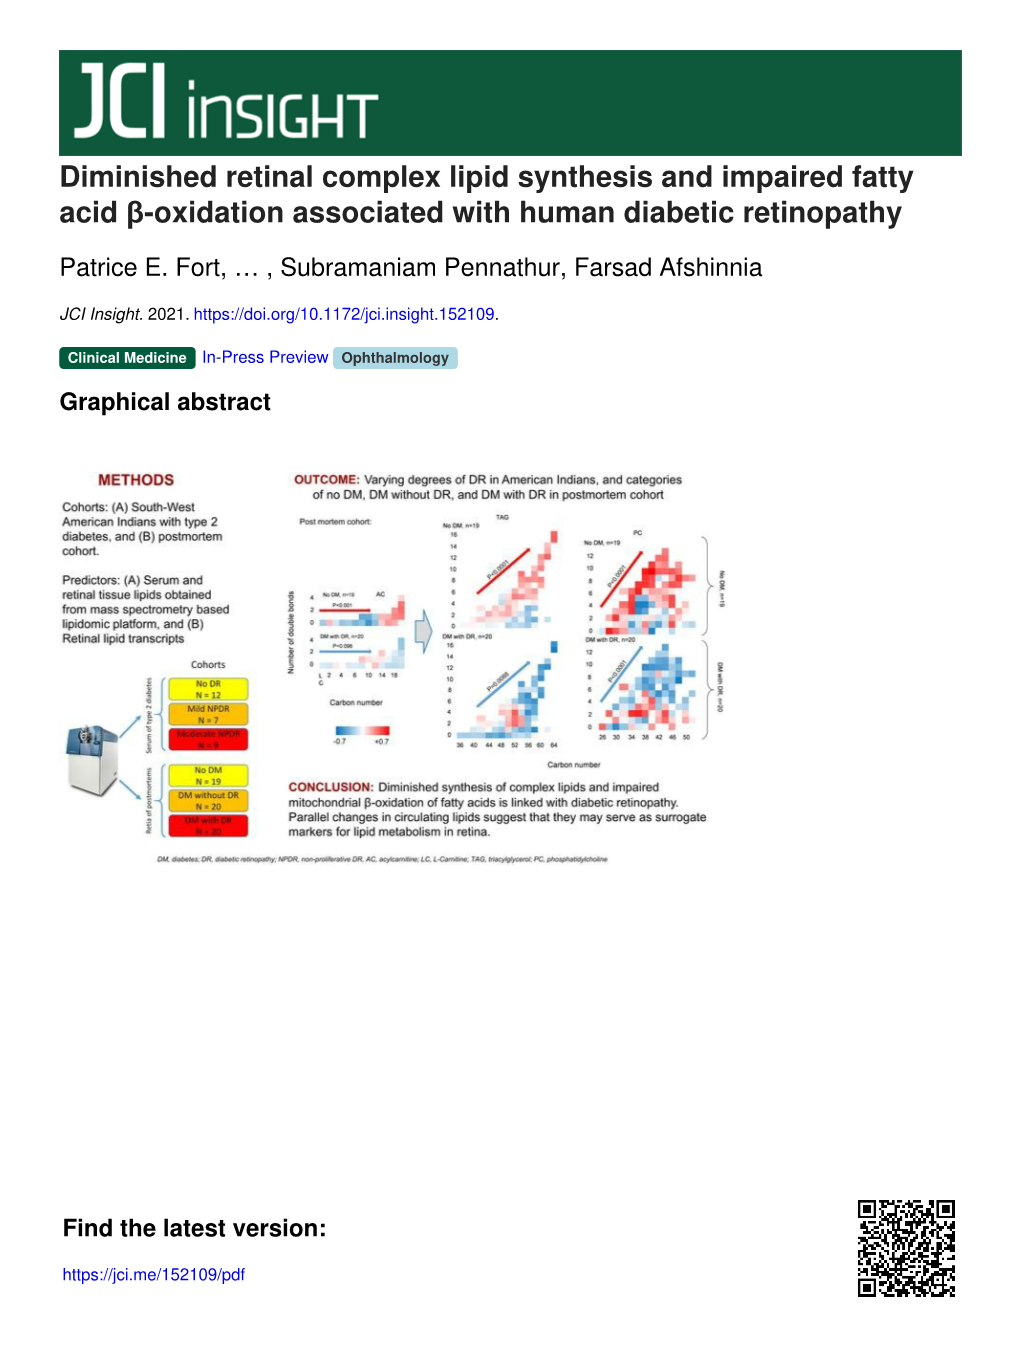 Diminished Retinal Complex Lipid Synthesis and Impaired Fatty Acid Β-Oxidation Associated with Human Diabetic Retinopathy